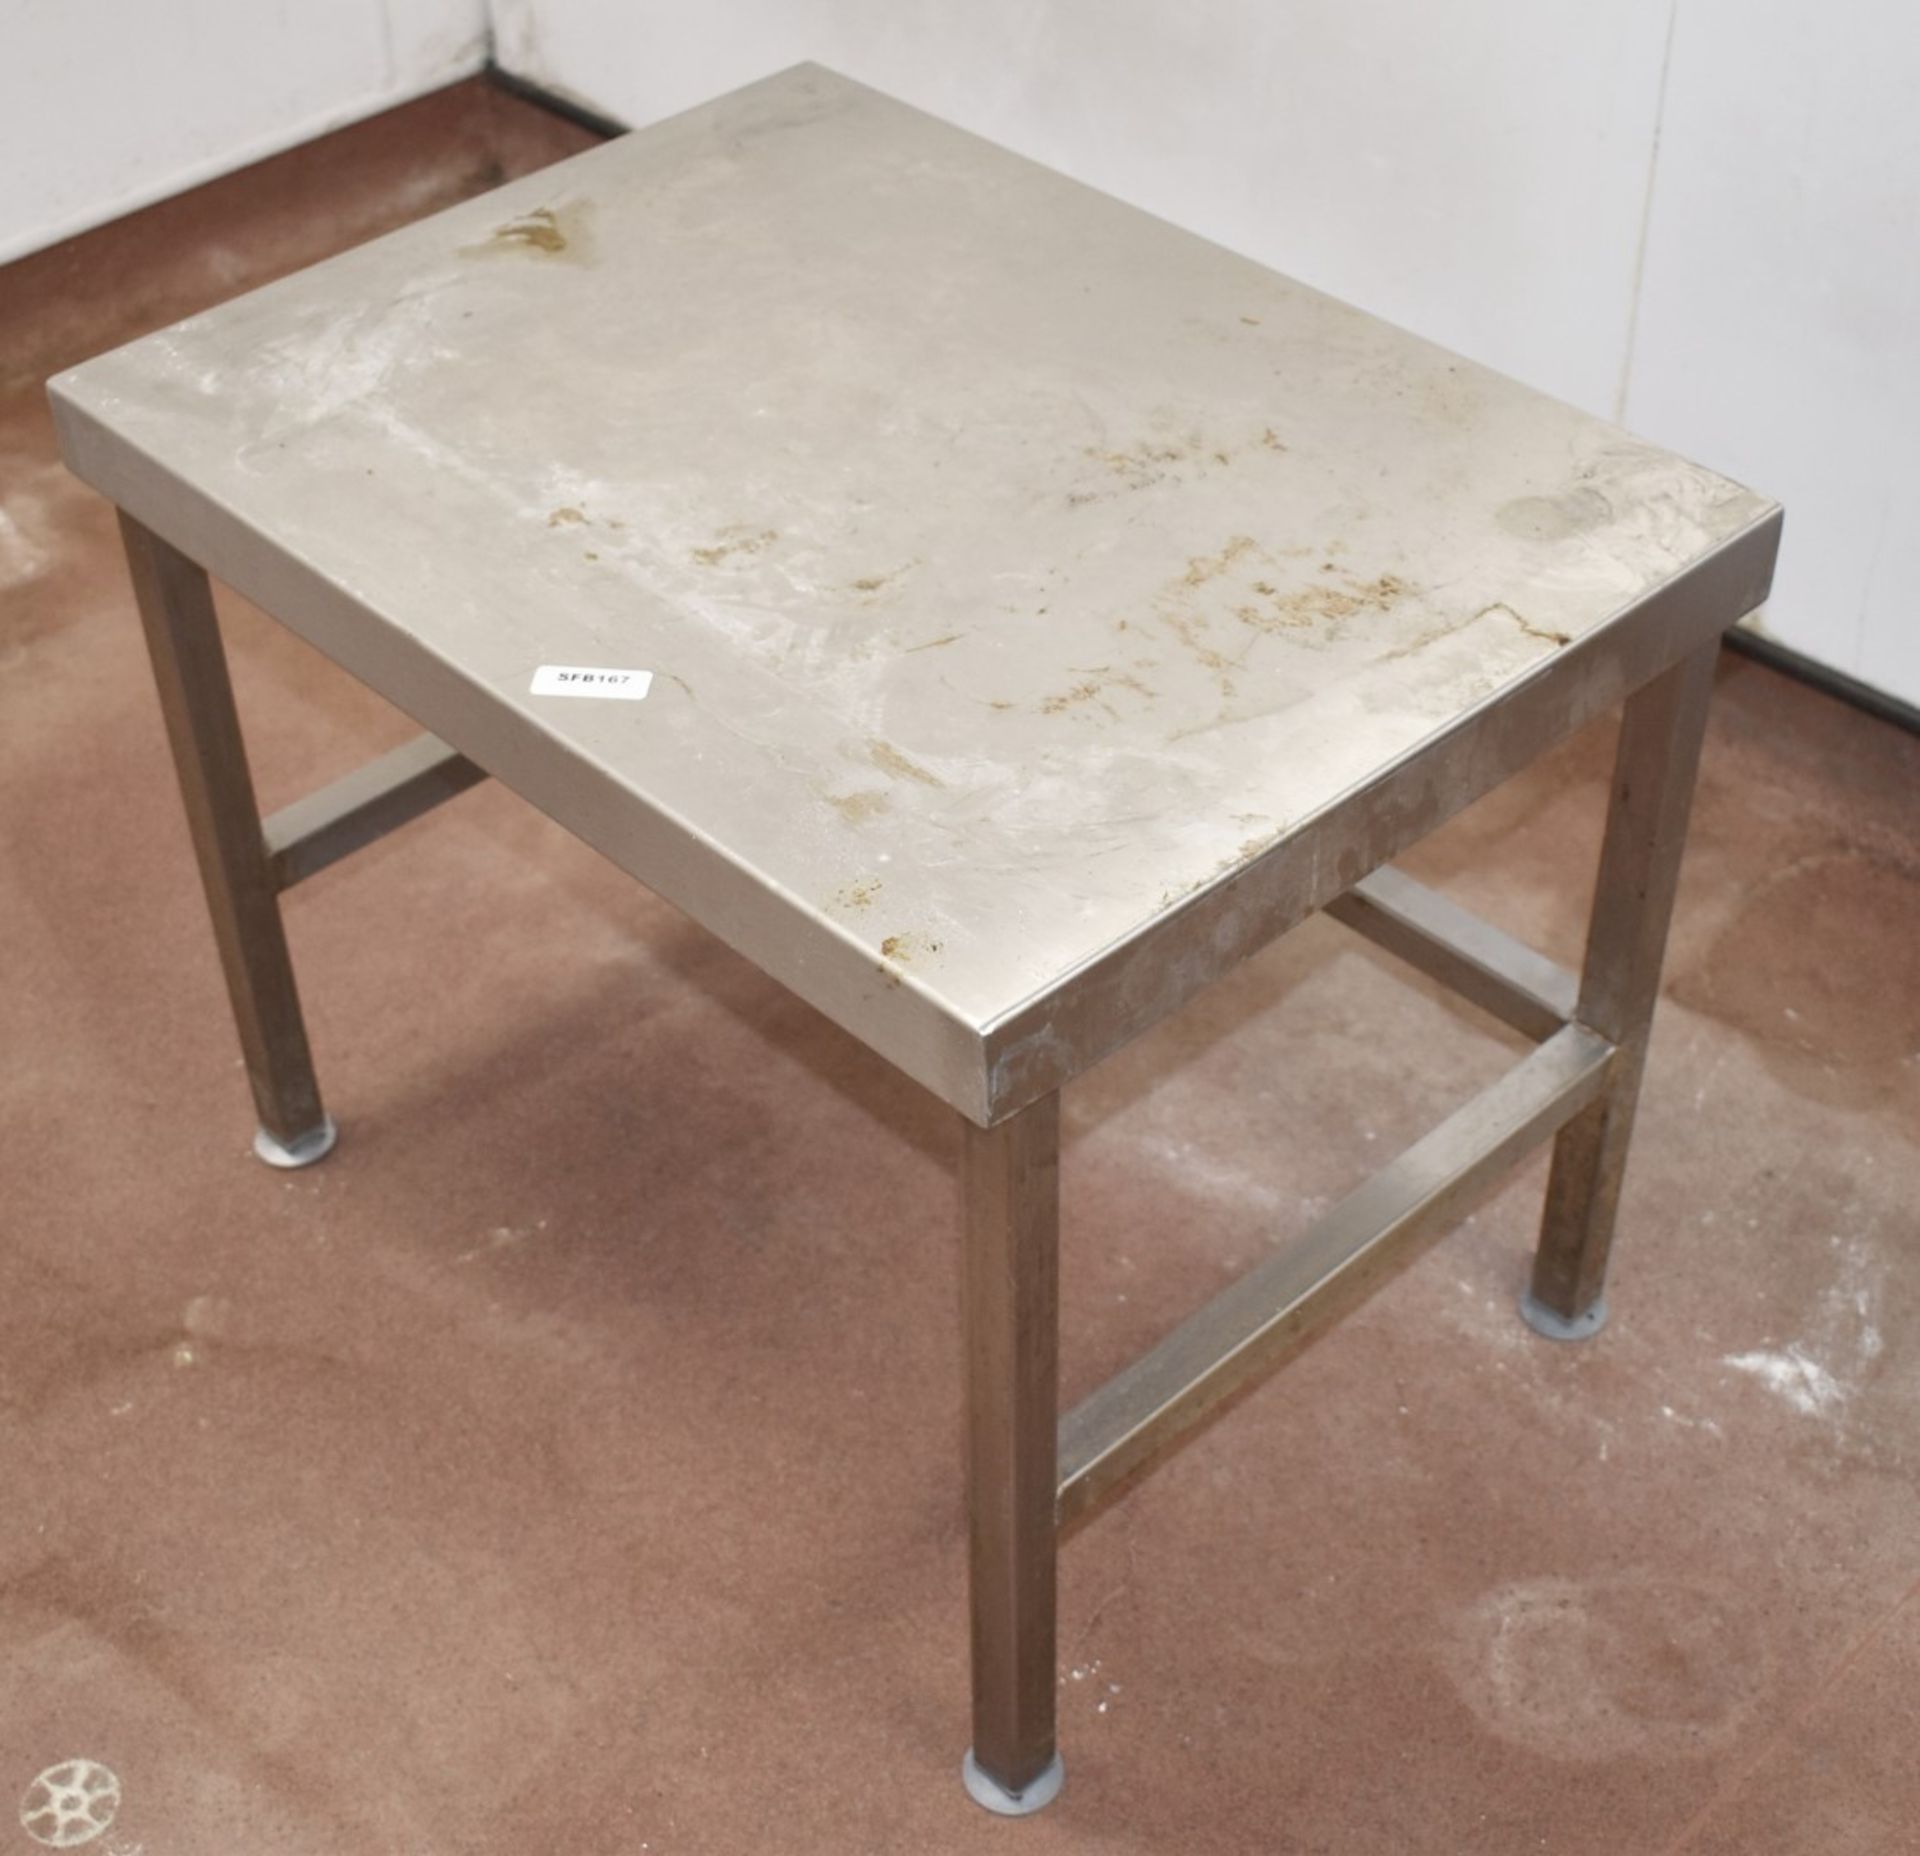 1 x Stainless Steel Low Profile Prep Table / Stand - Dimesions: W68 x D52 x H54cm - From a Popular